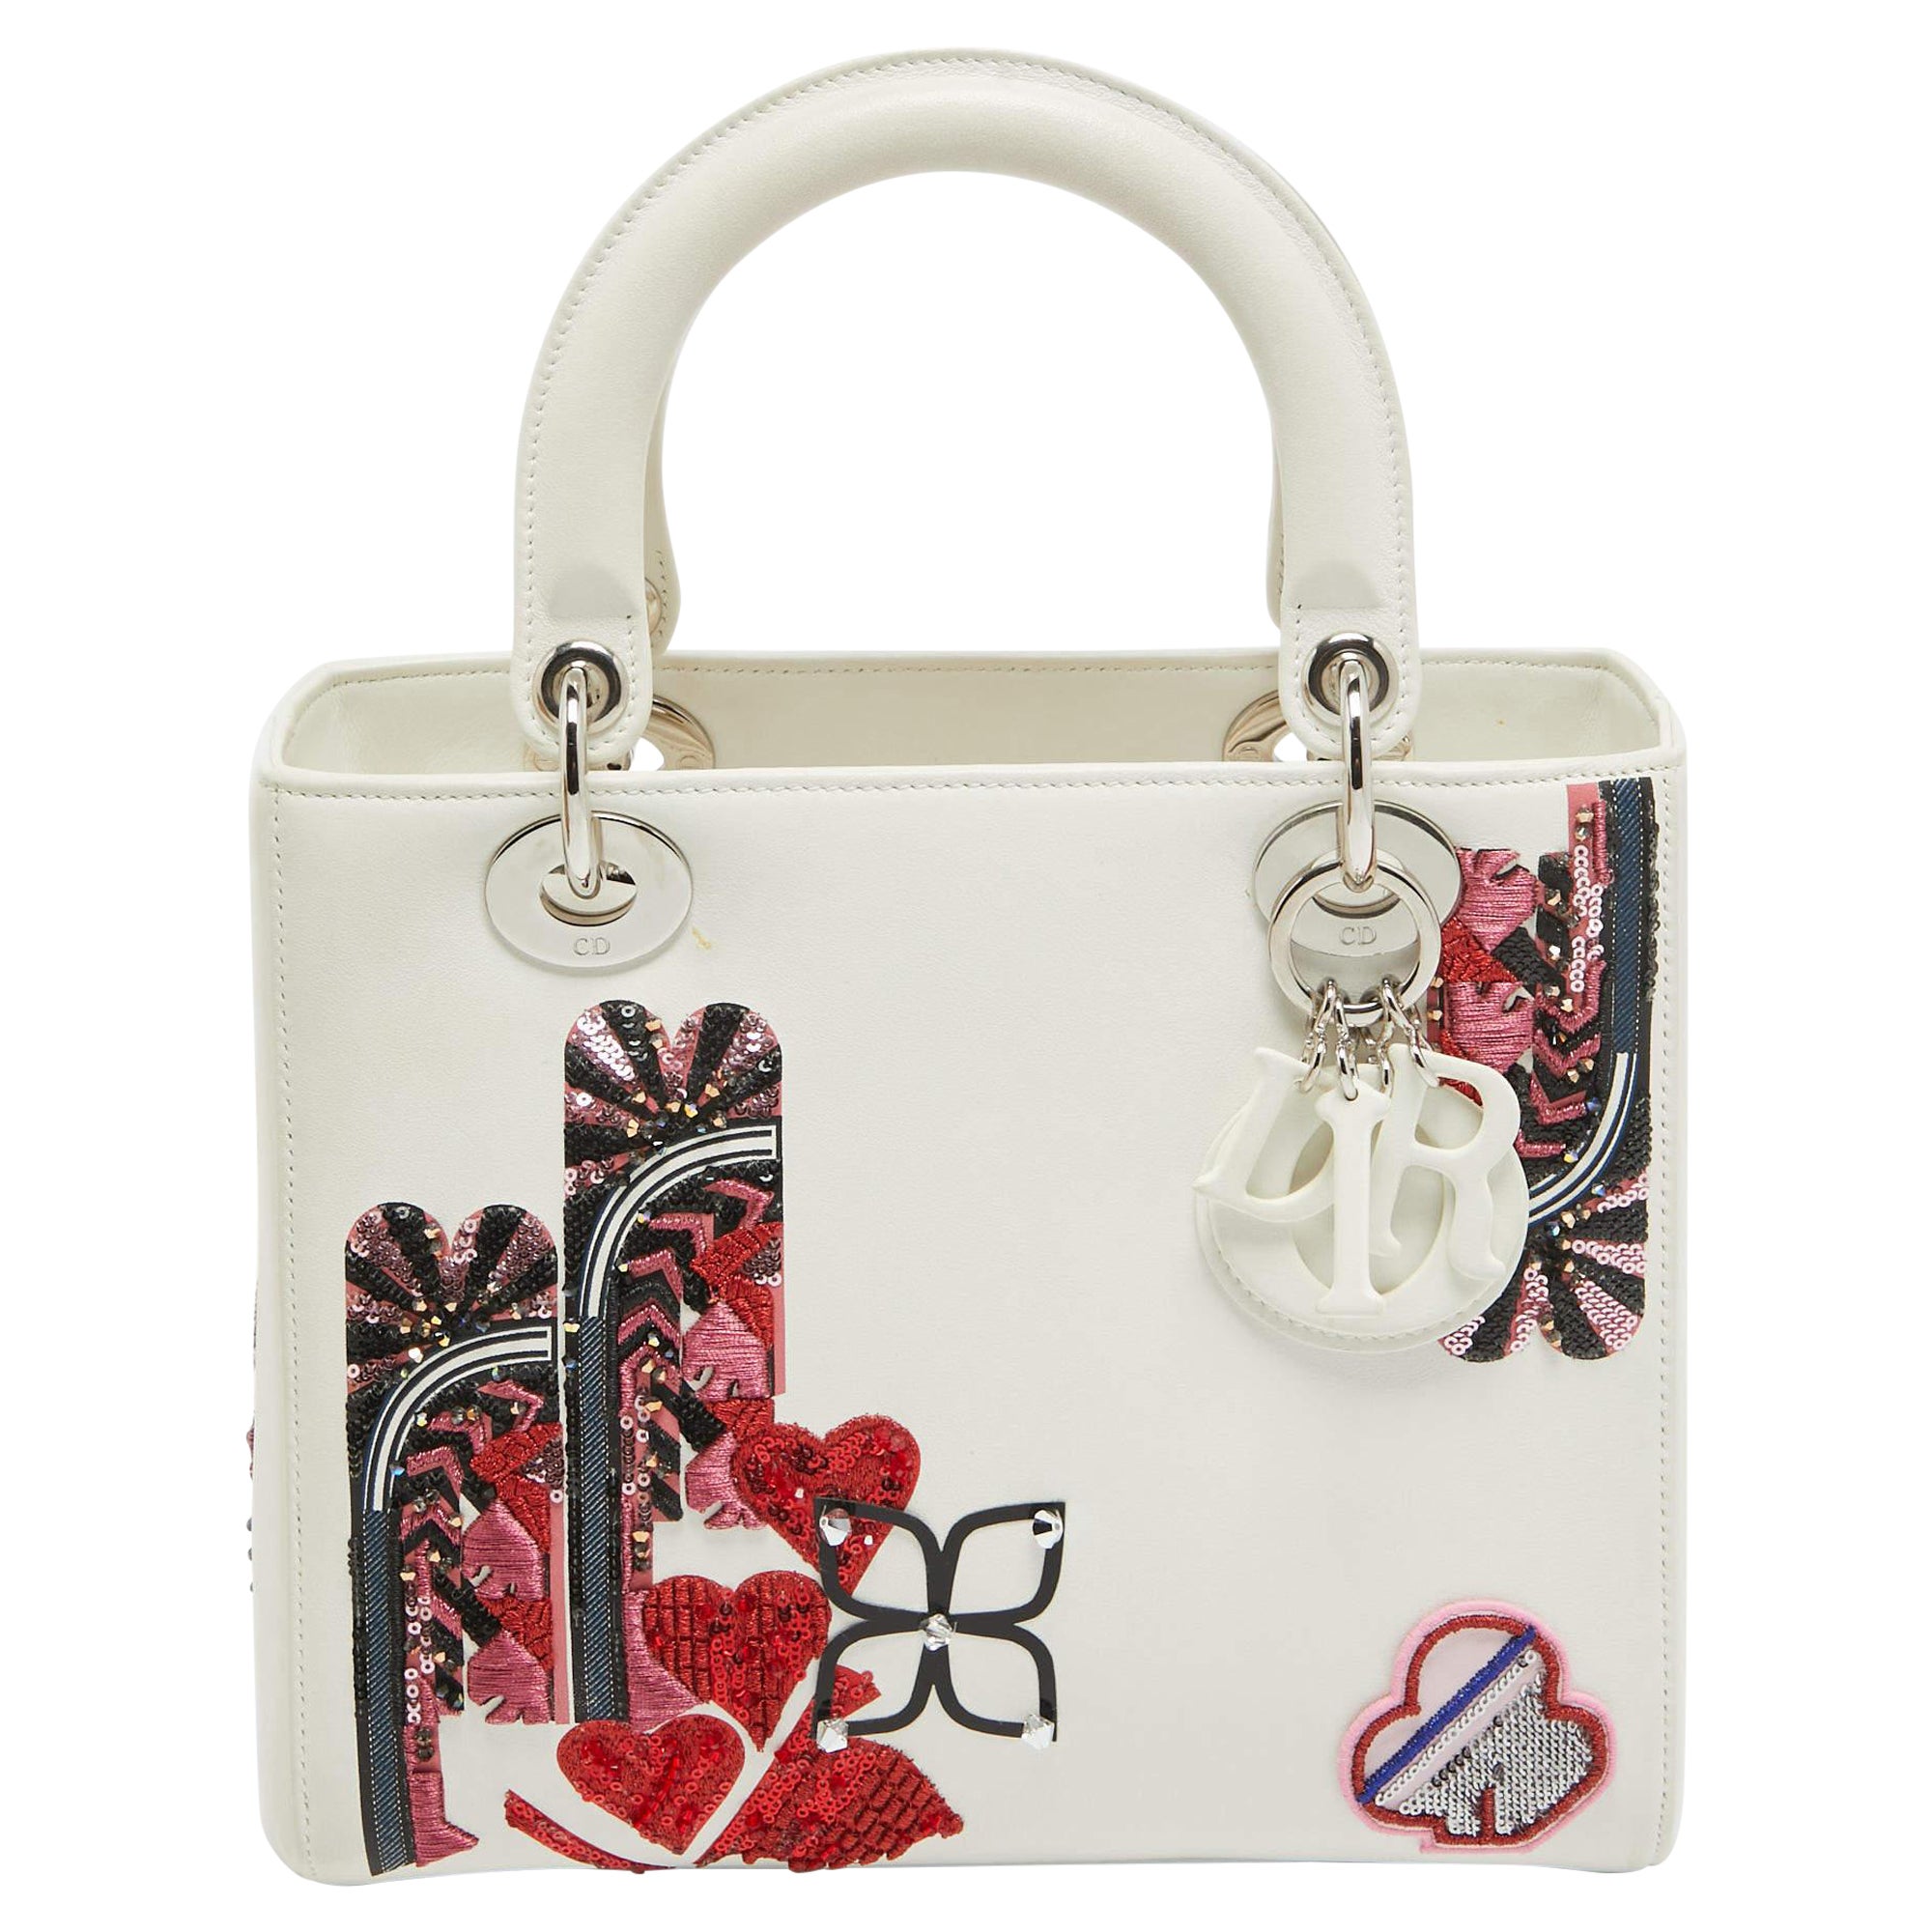 Dior White Leather Medium Sequin and Embroidered Lady Dior Tote